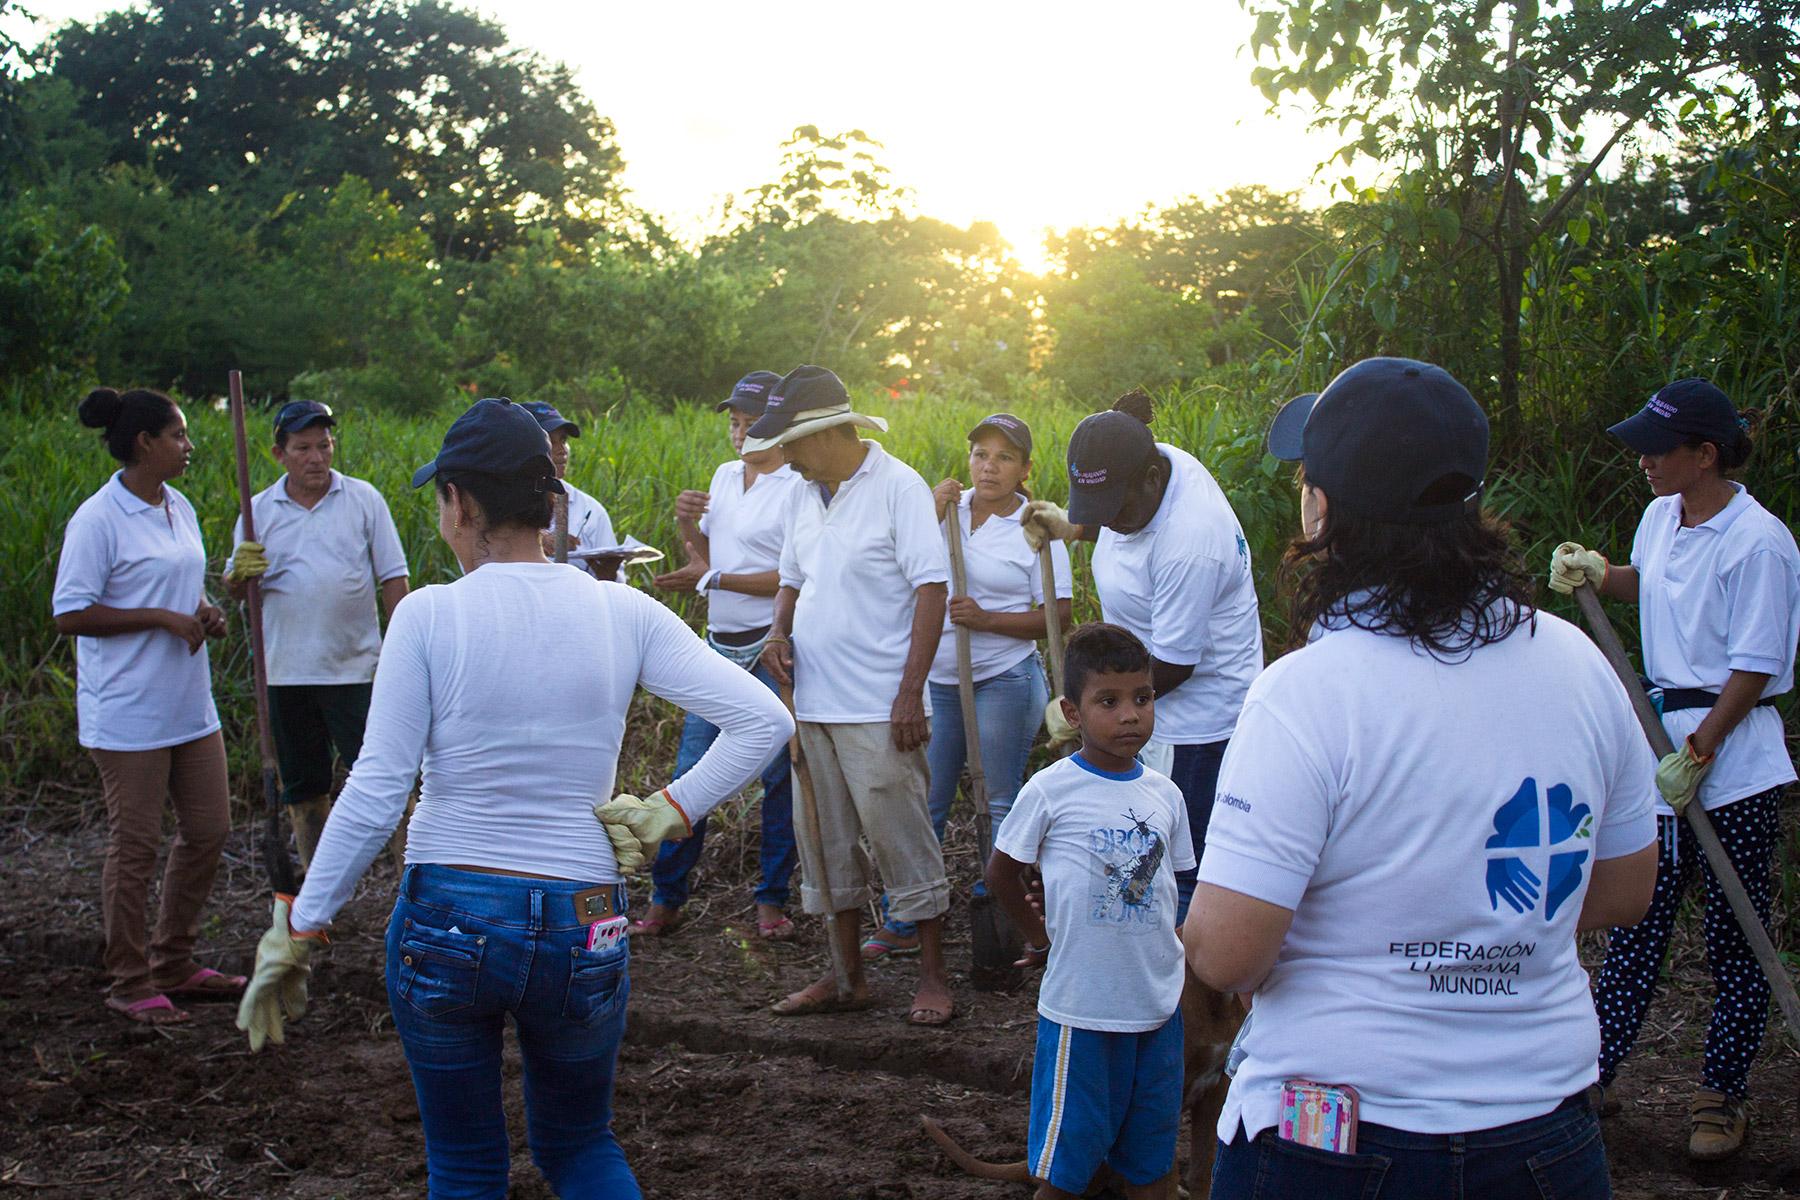 In Colombia, the LWF helped increase the resilience of communities living in informal migrant settlements through activities that promote environmental stewardship. Photo: LWF Colombia/Diego Alvarez Ramirez 